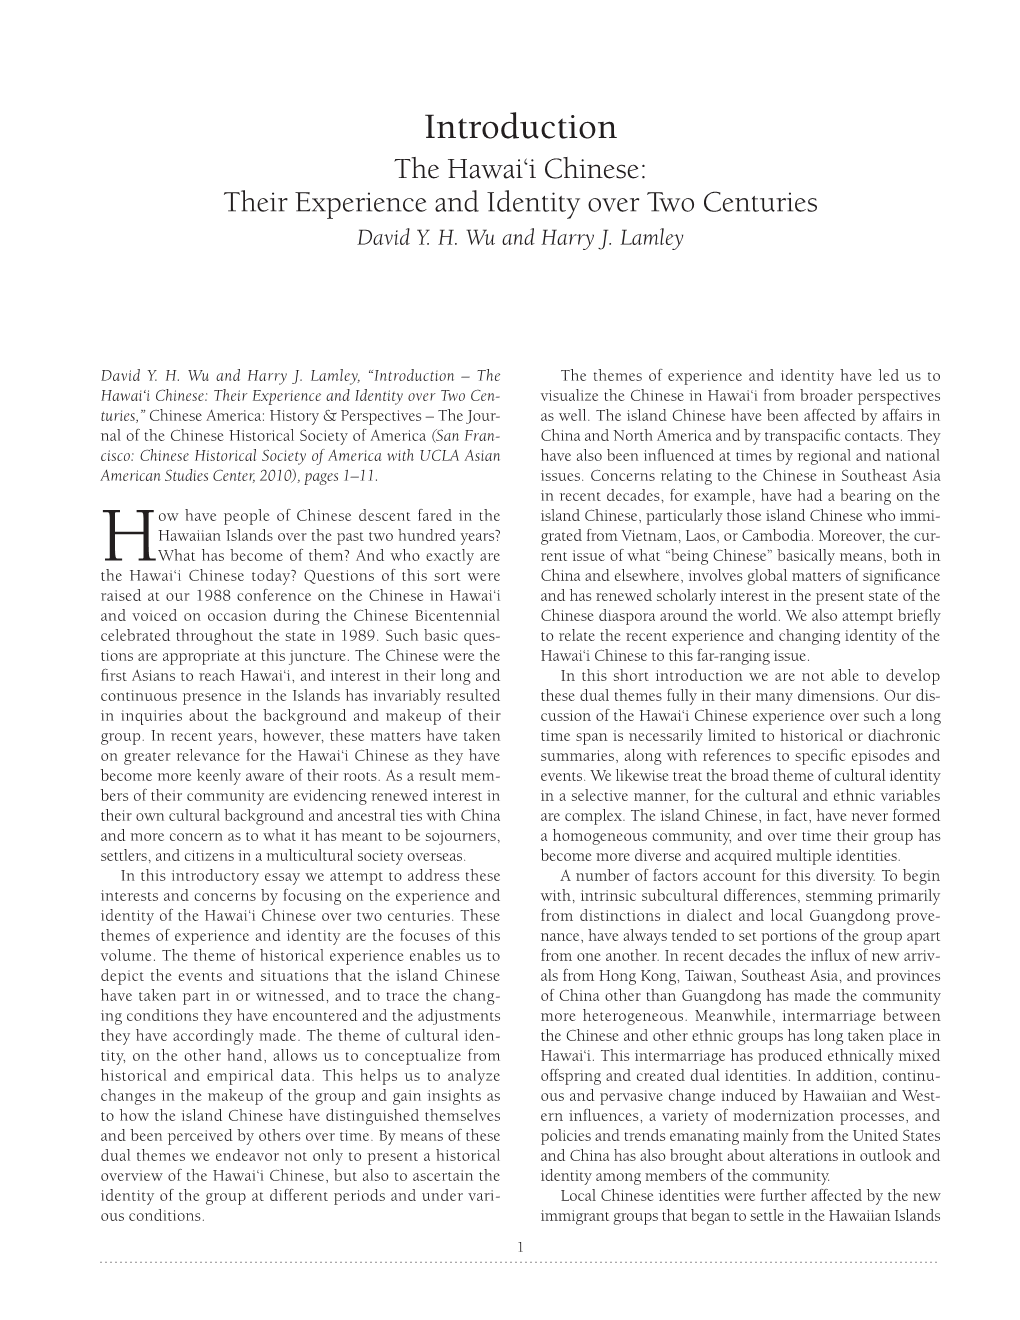 Introduction the Hawai‘I Chinese: Their Experience and Identity Over Two Centuries David Y